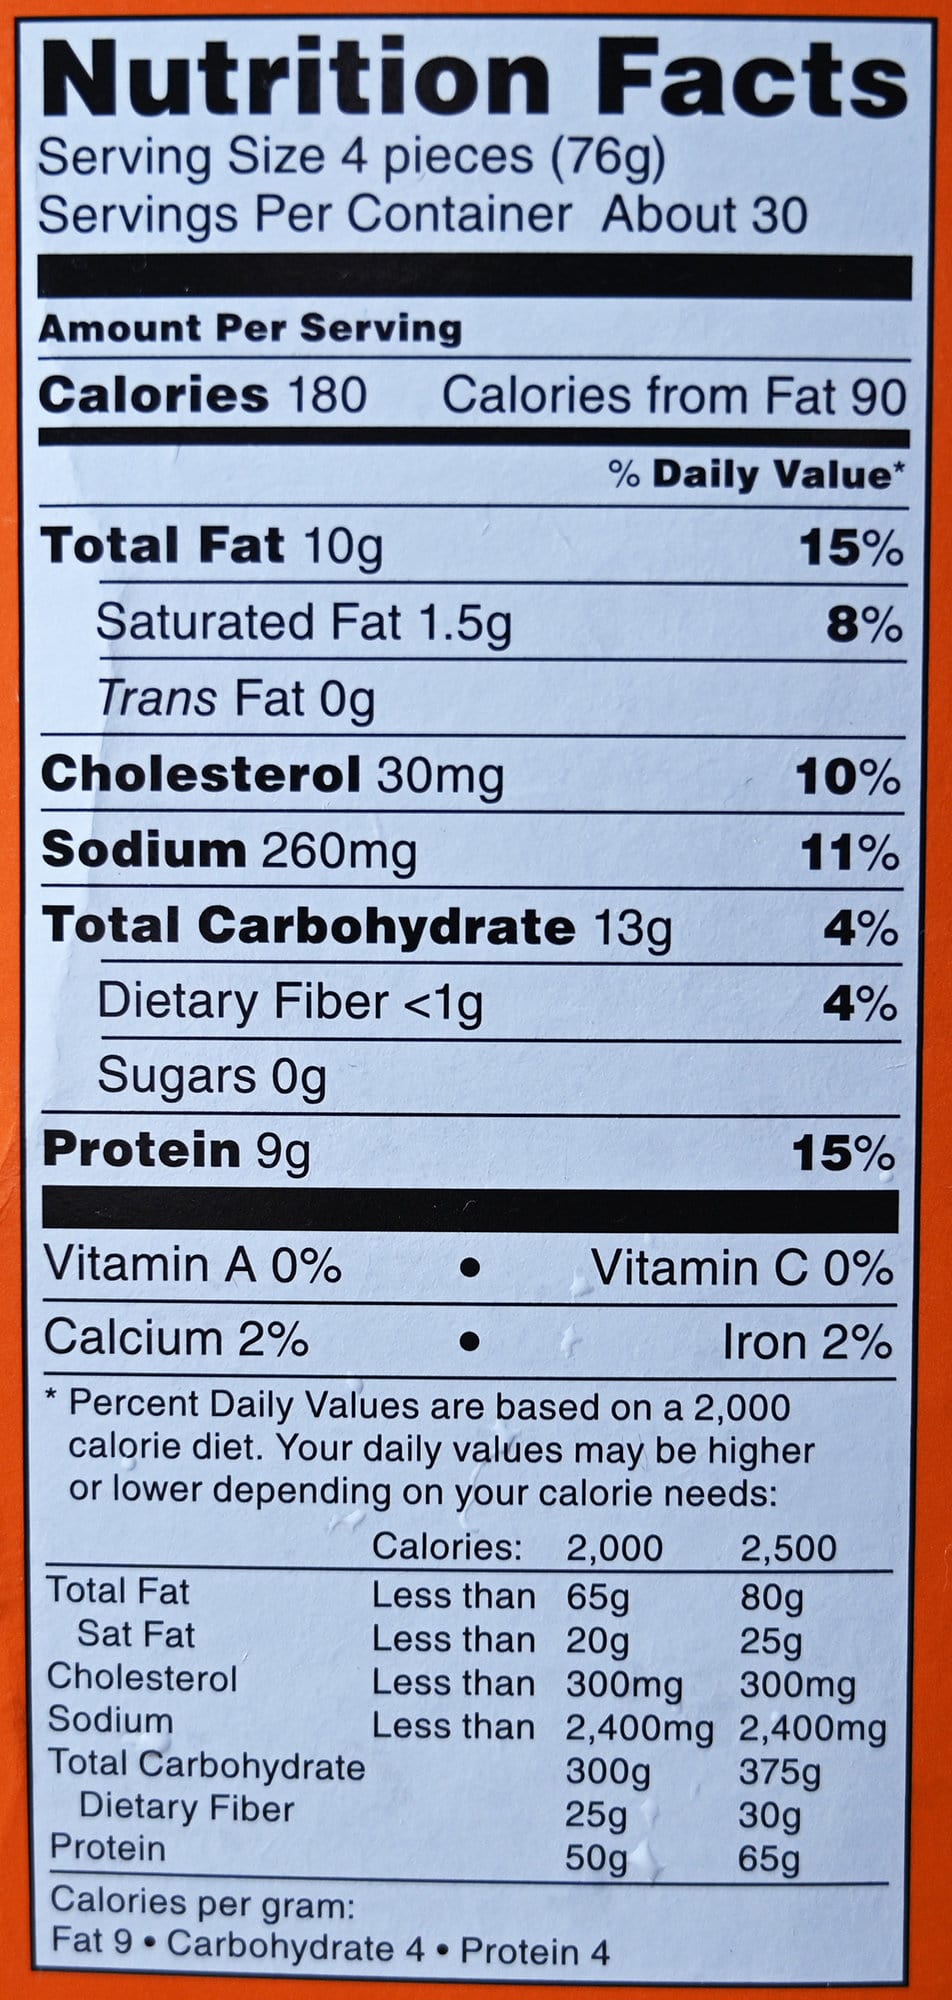 Image of the nutrition facts for the dino nuggets from the back of the box.